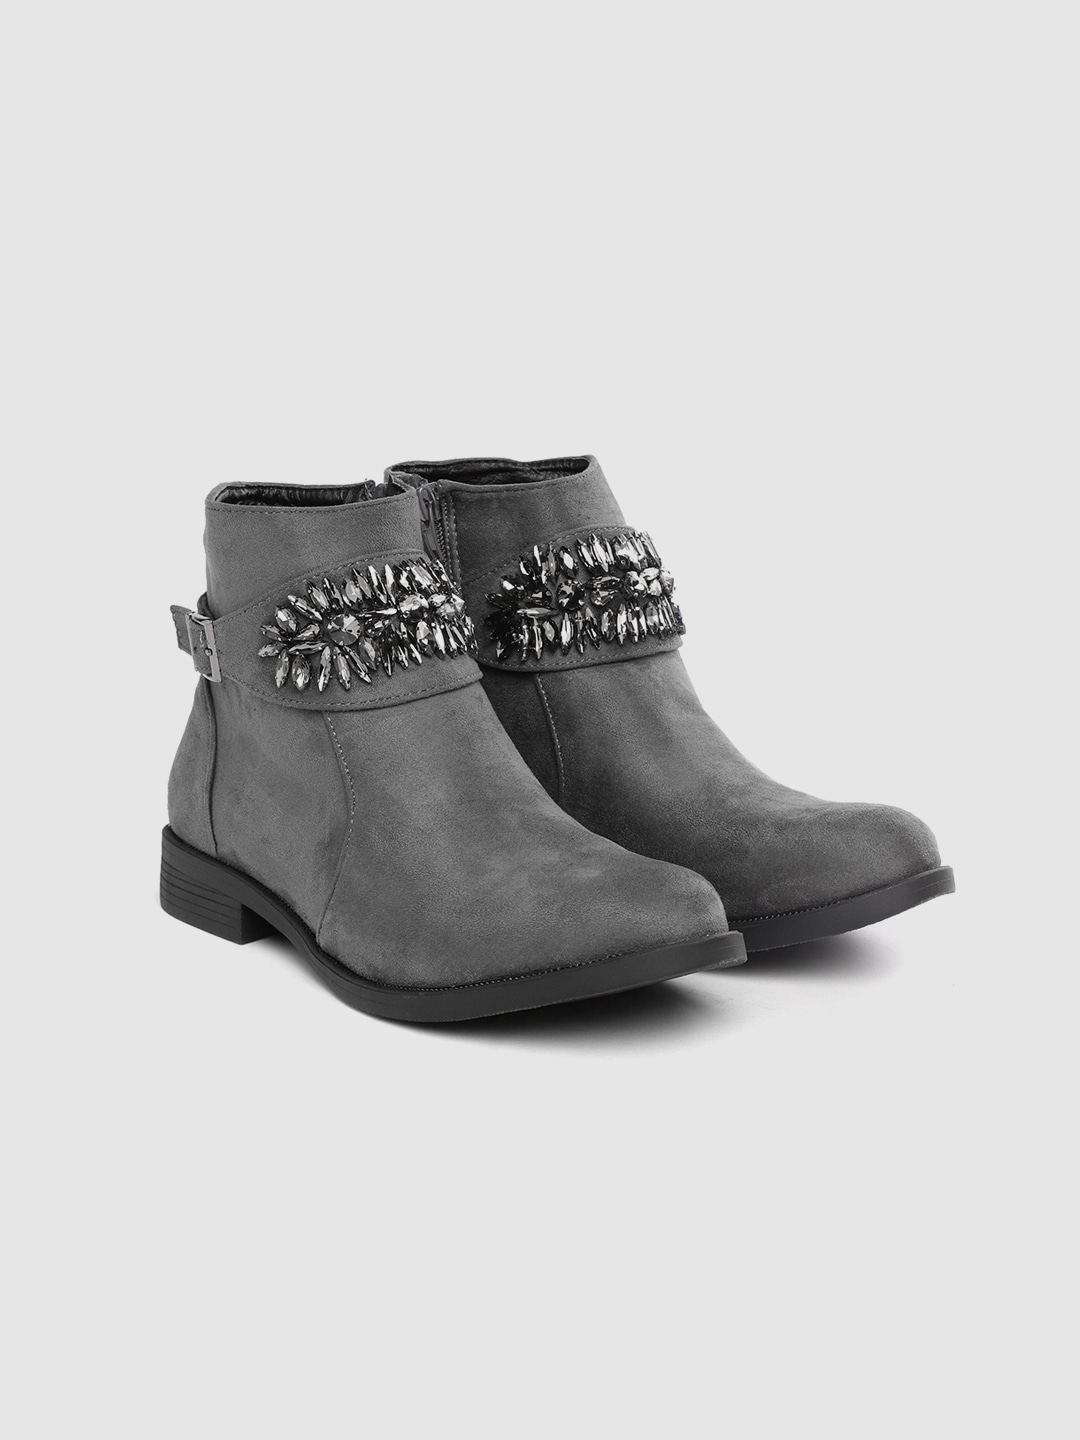 Lavie Women Charcoal Grey Embellished Mid-Top Flat Boots Price in India